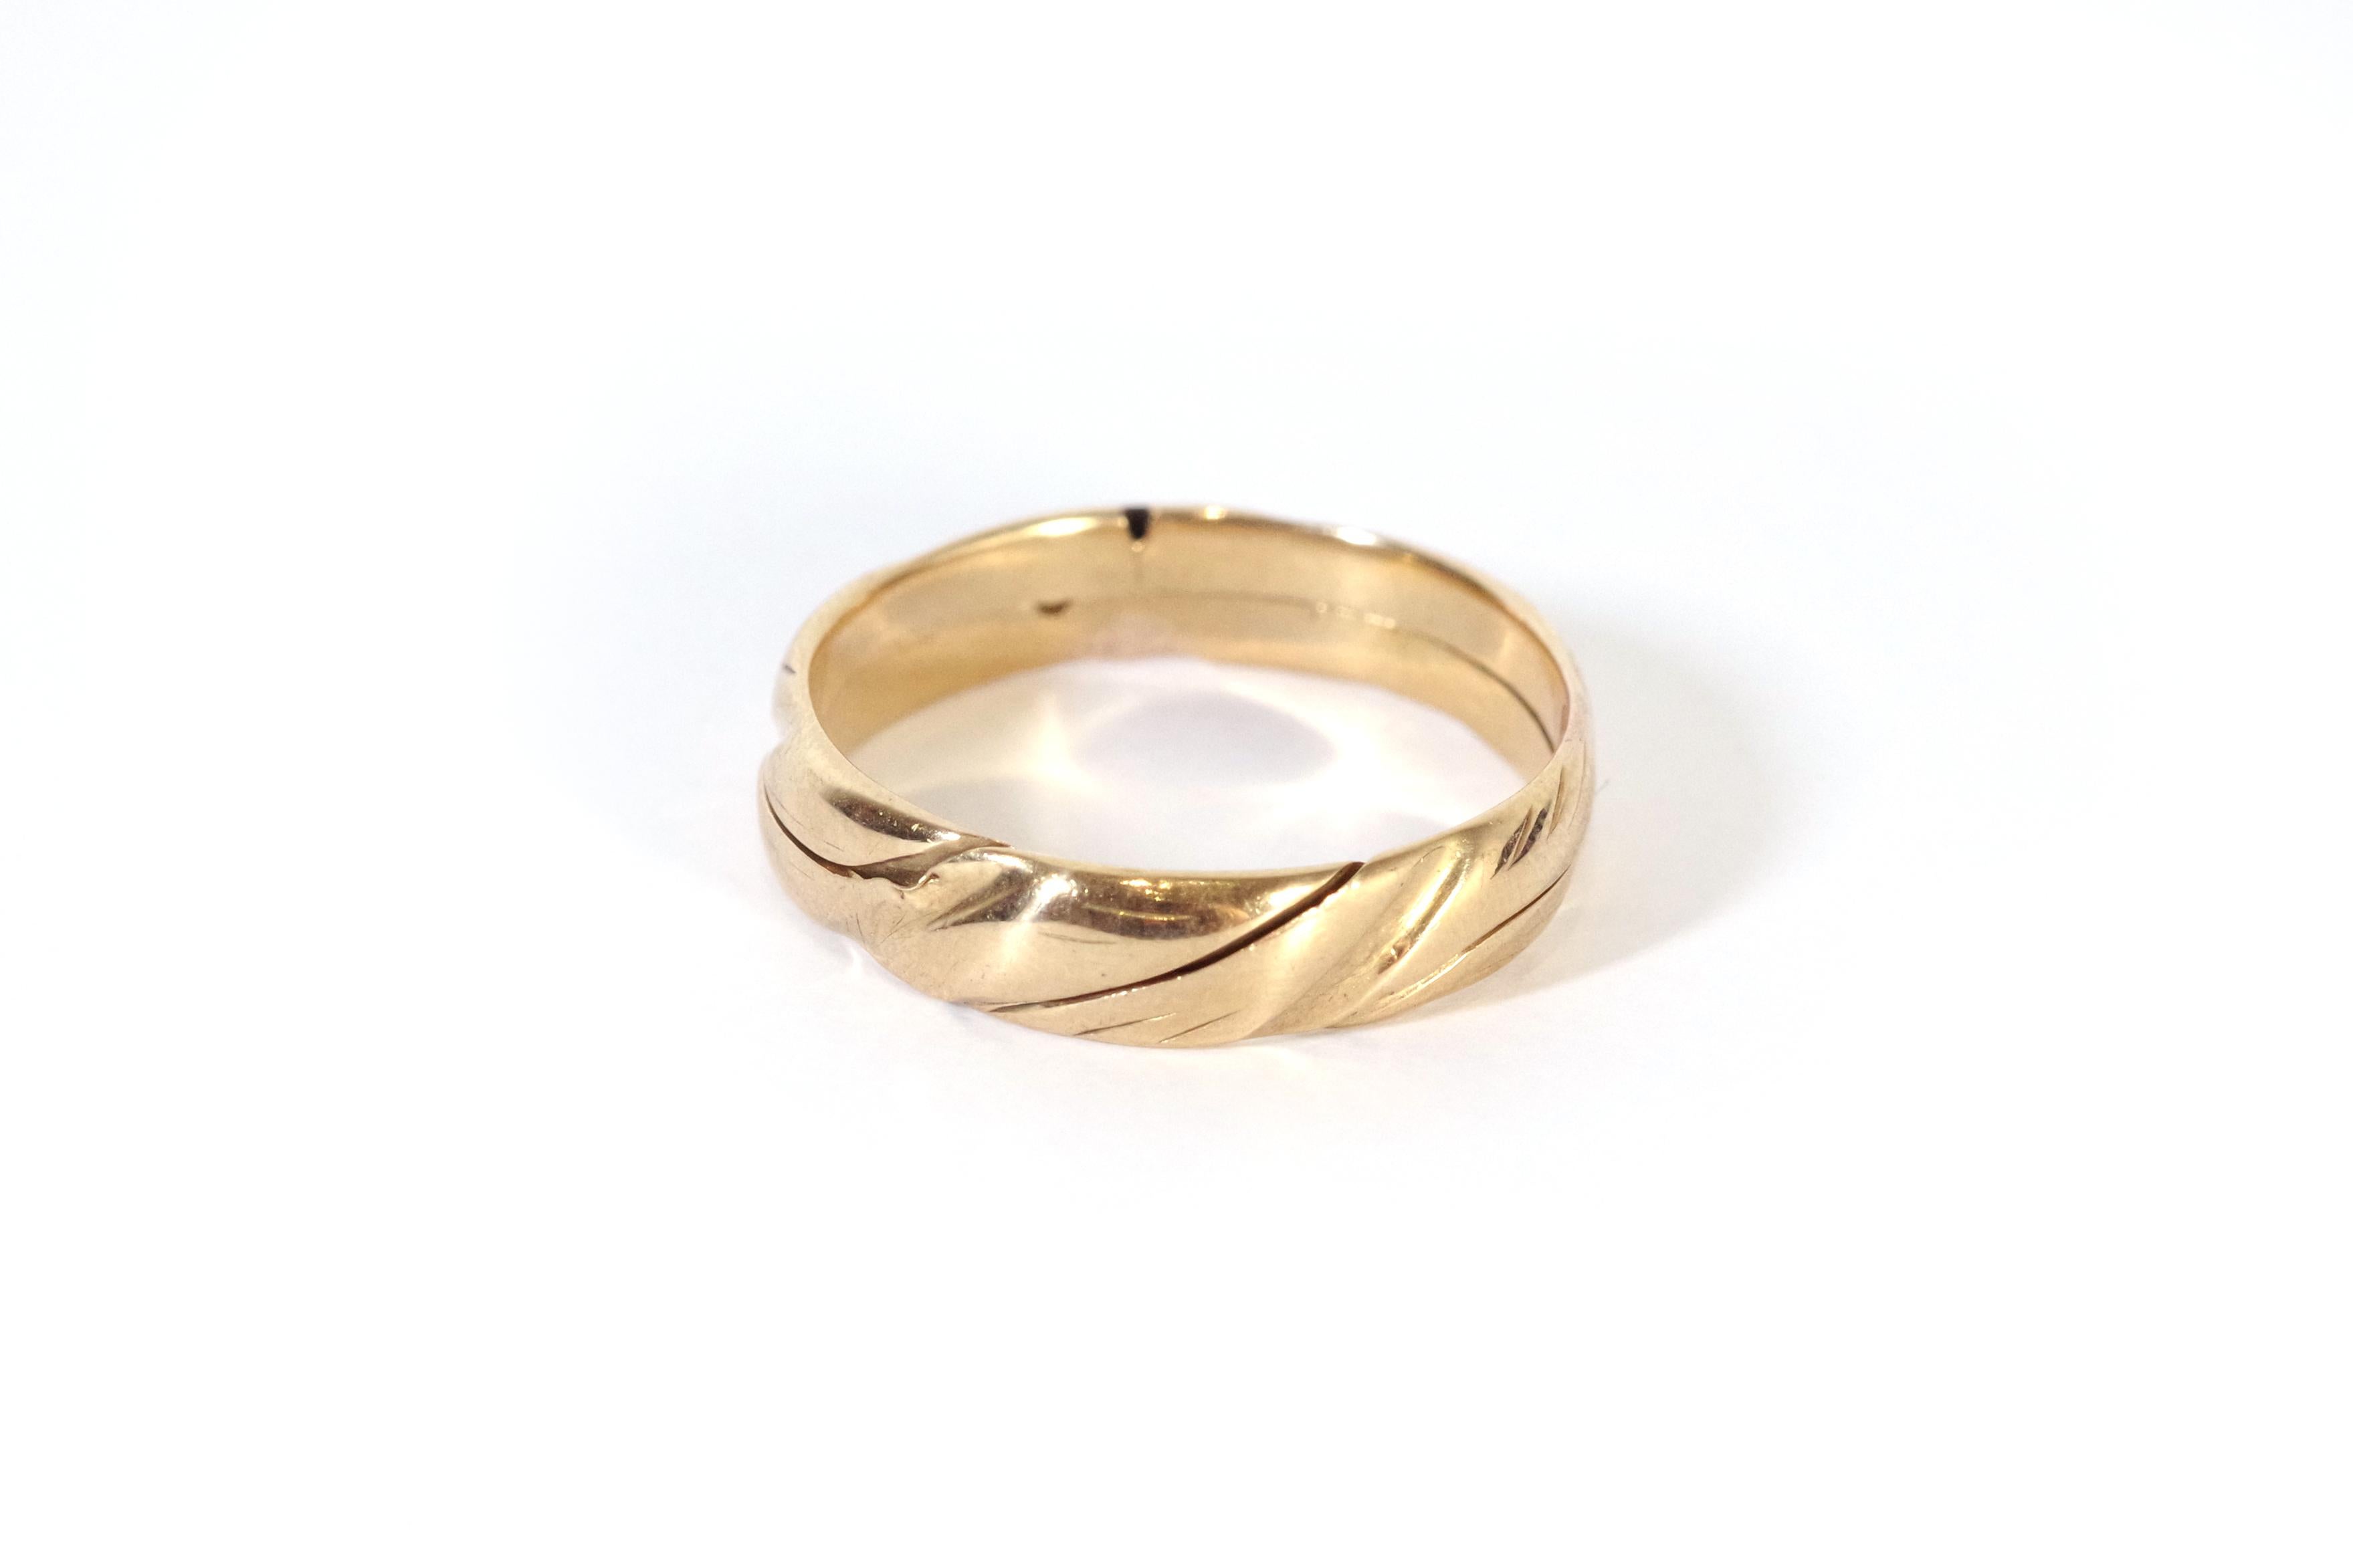 Antique gimmel ring in 18 karat rose gold. This antique puzzle ring set features two interlocking rings crafted from 18-karat rose gold. The rings form a complete round hoop when interlocked and create a delightful puzzle-like design. While these